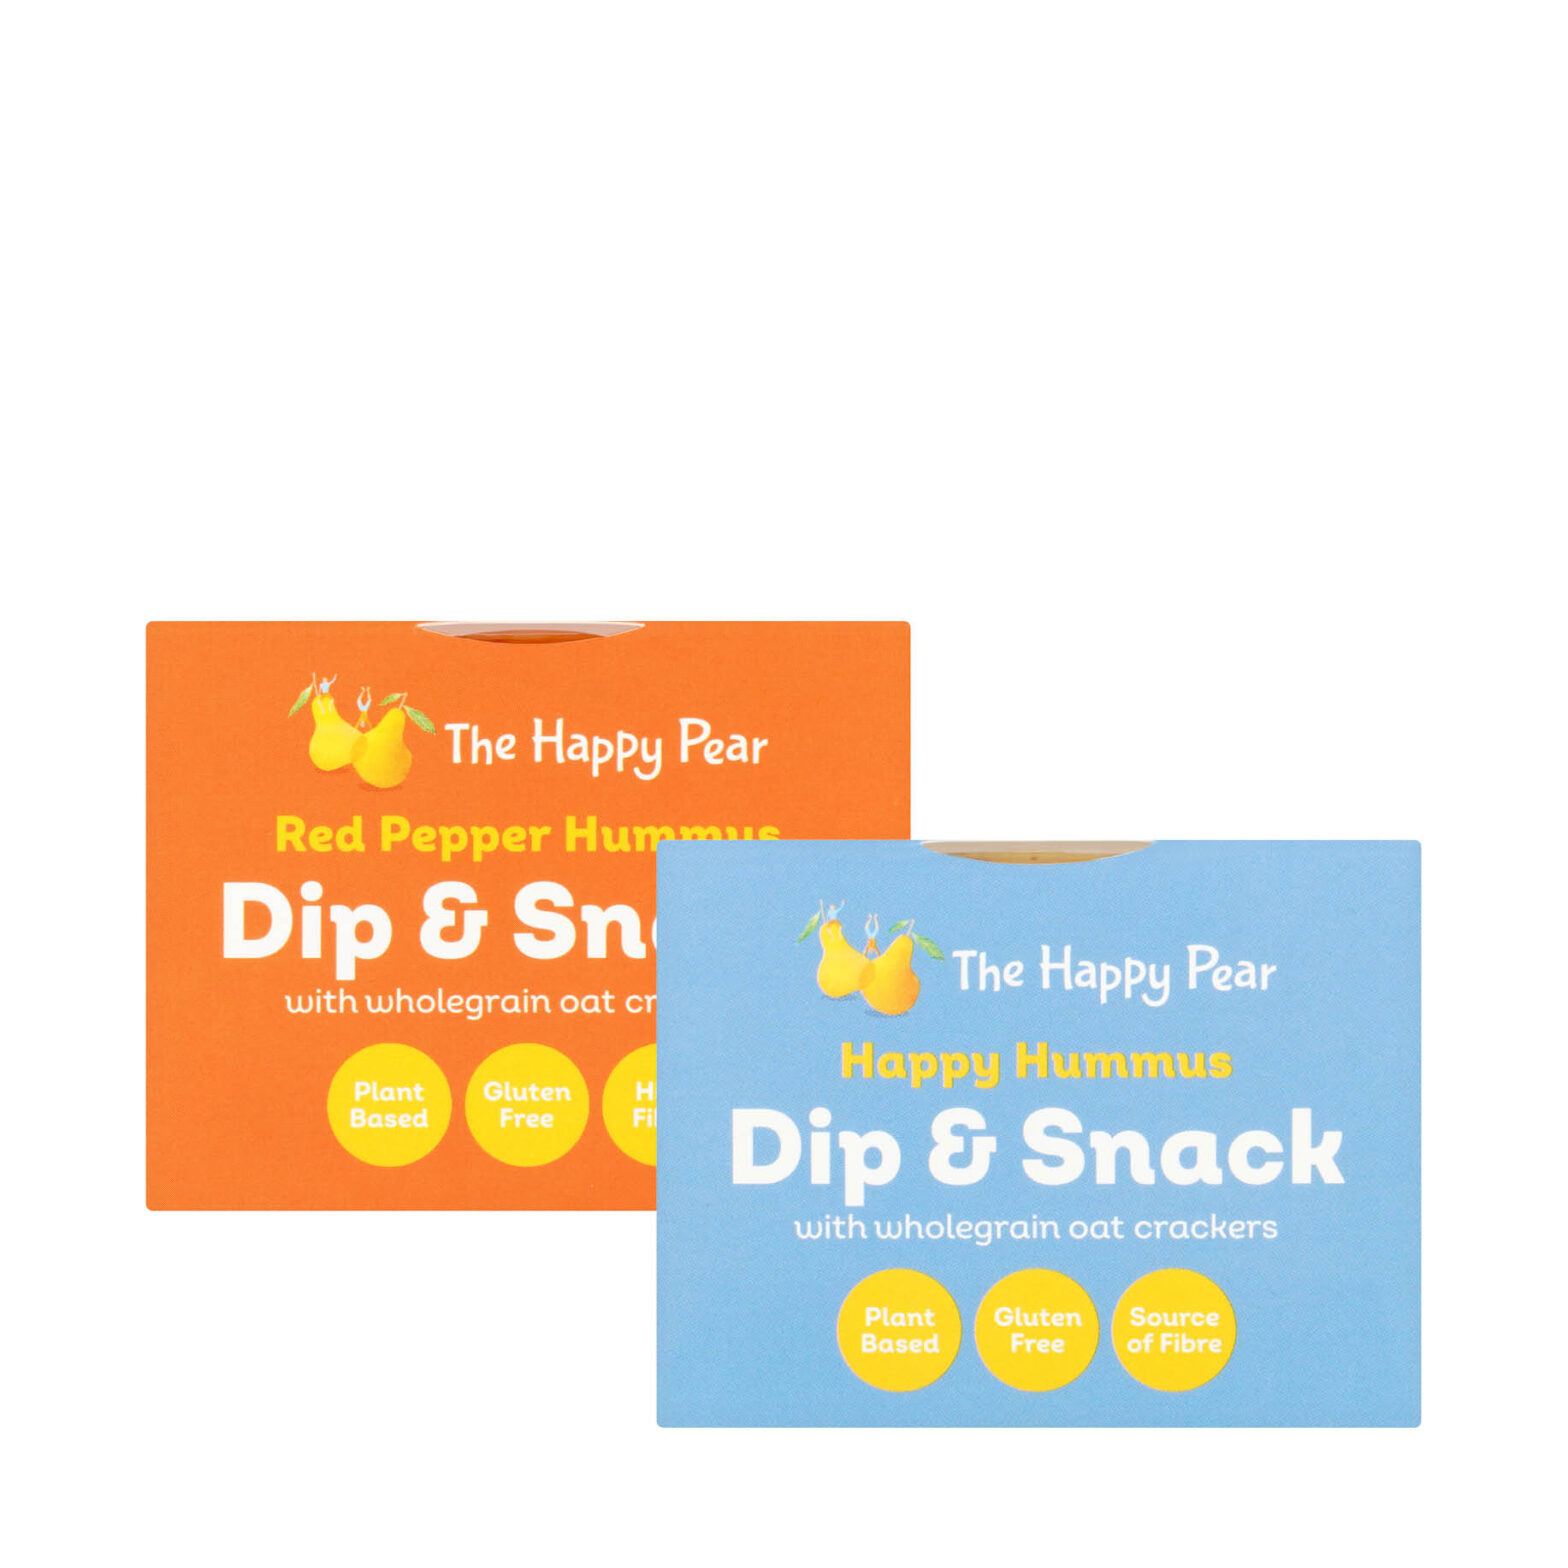 The Happy Pear Red Pepper Hummus Dip & Snack  / The Happy Pear Hummus Dip & Snack